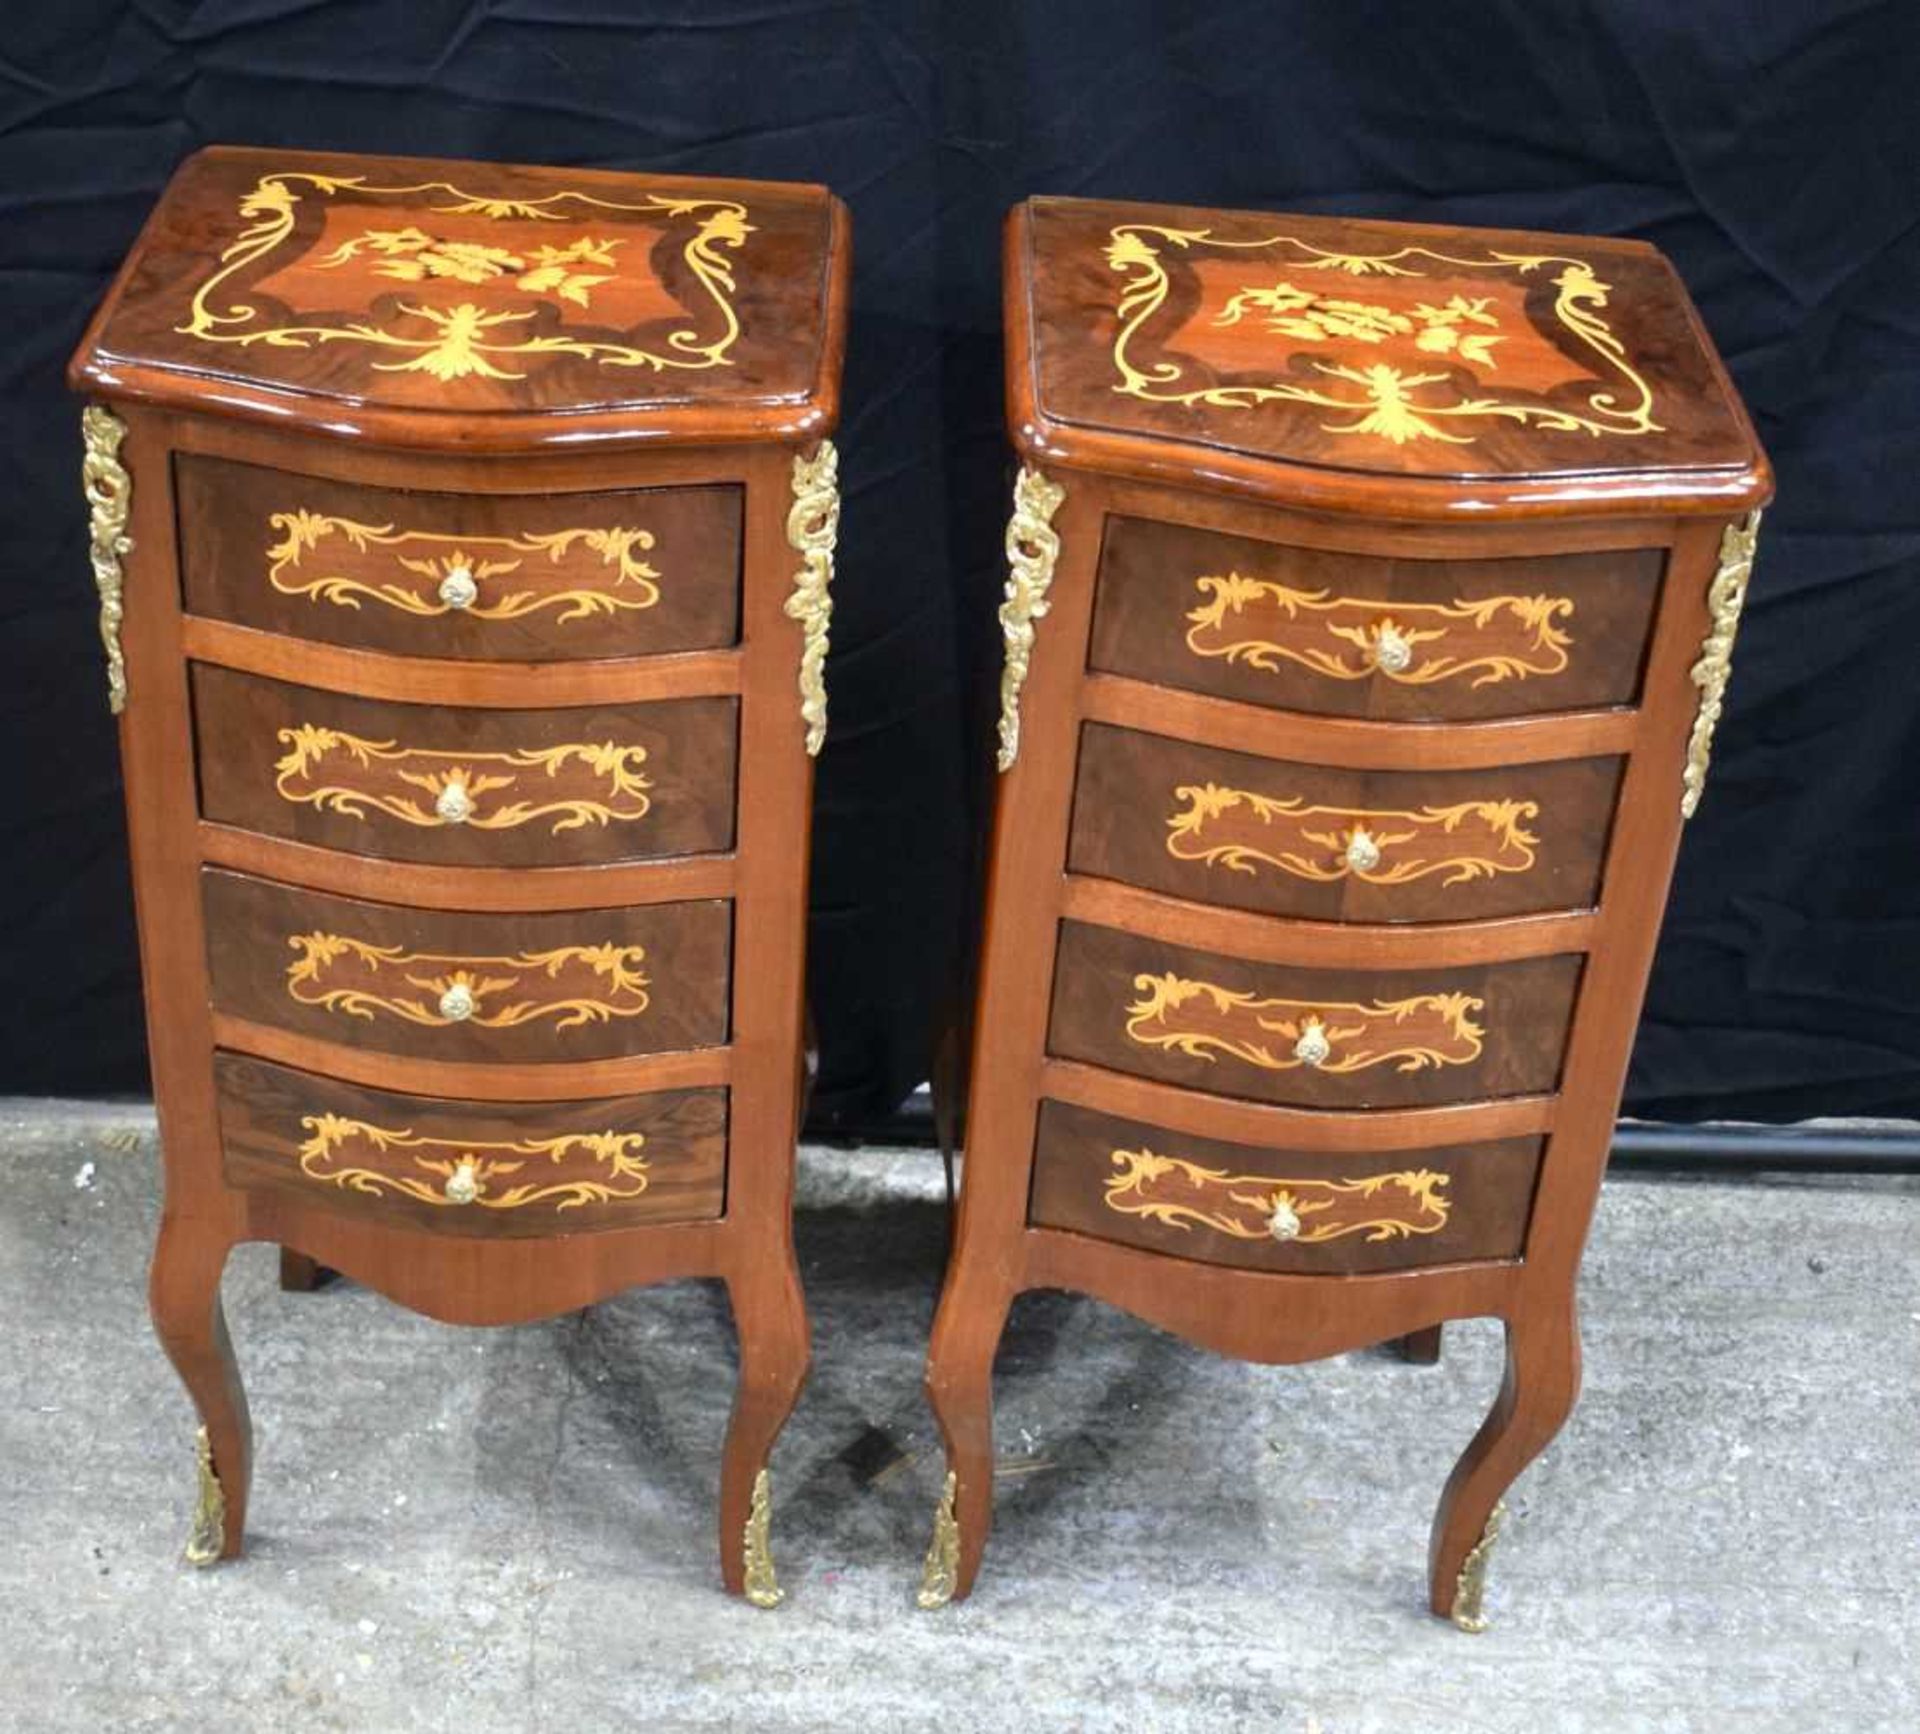 A pair of French style 4 drawer inlaid chests with gilt metal decoration 77 x 35 x 35 cm. (2).